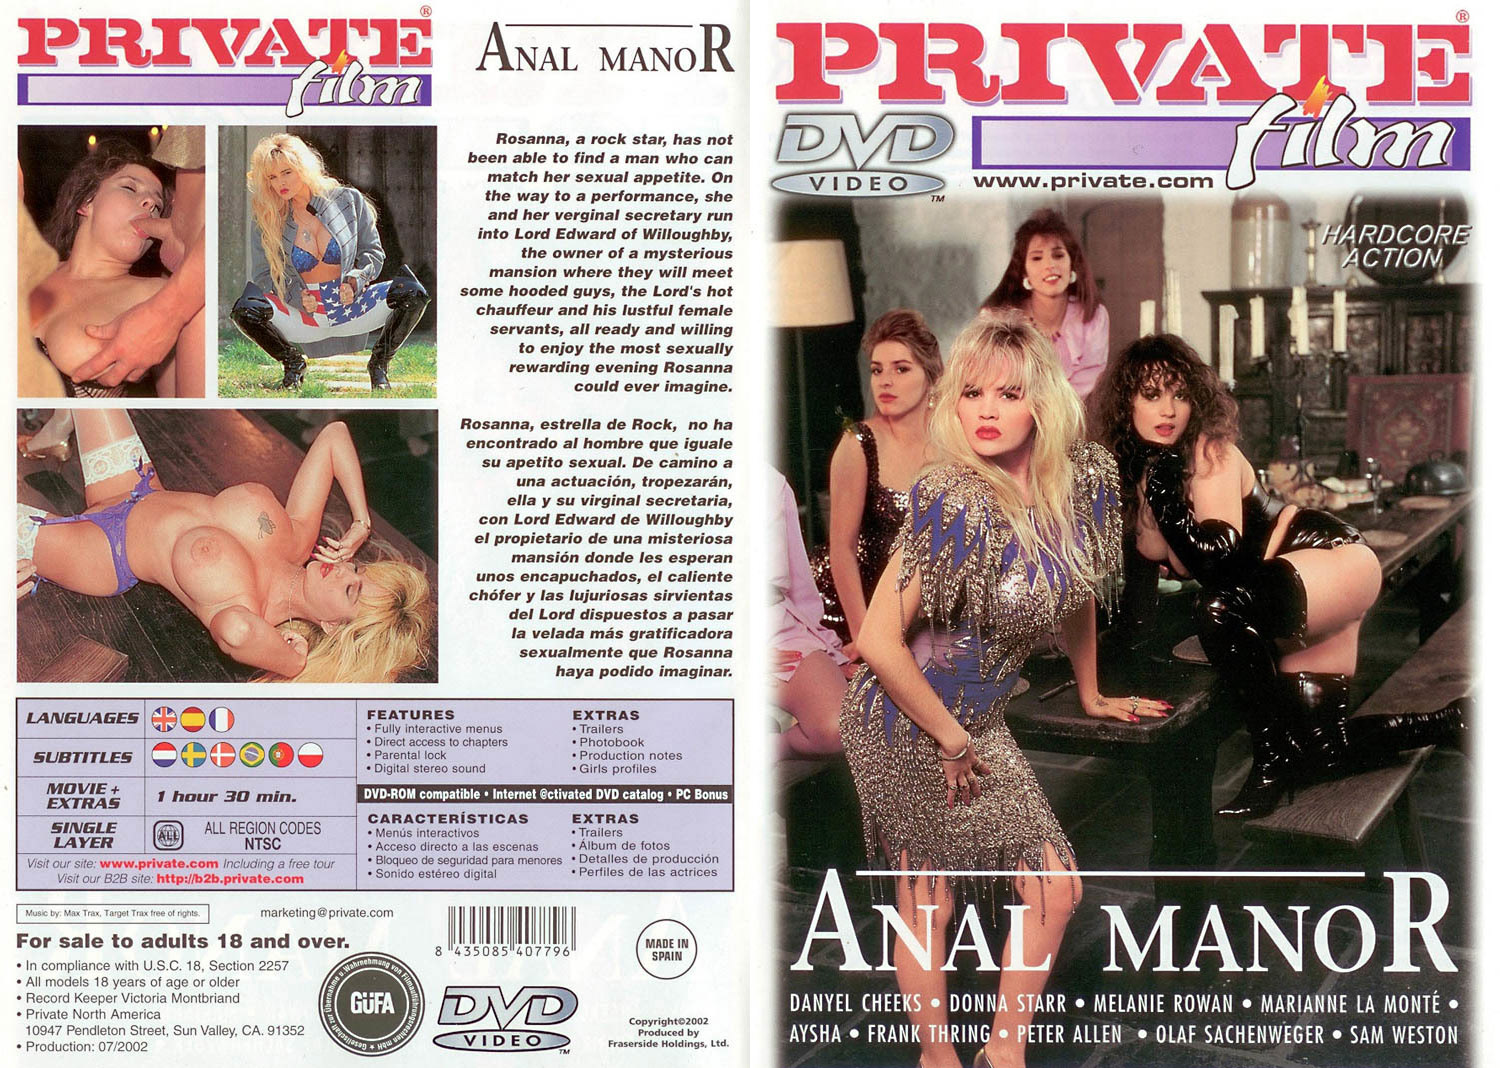 Private Film 2 - Anal Manor - 1993 - Steve Perry